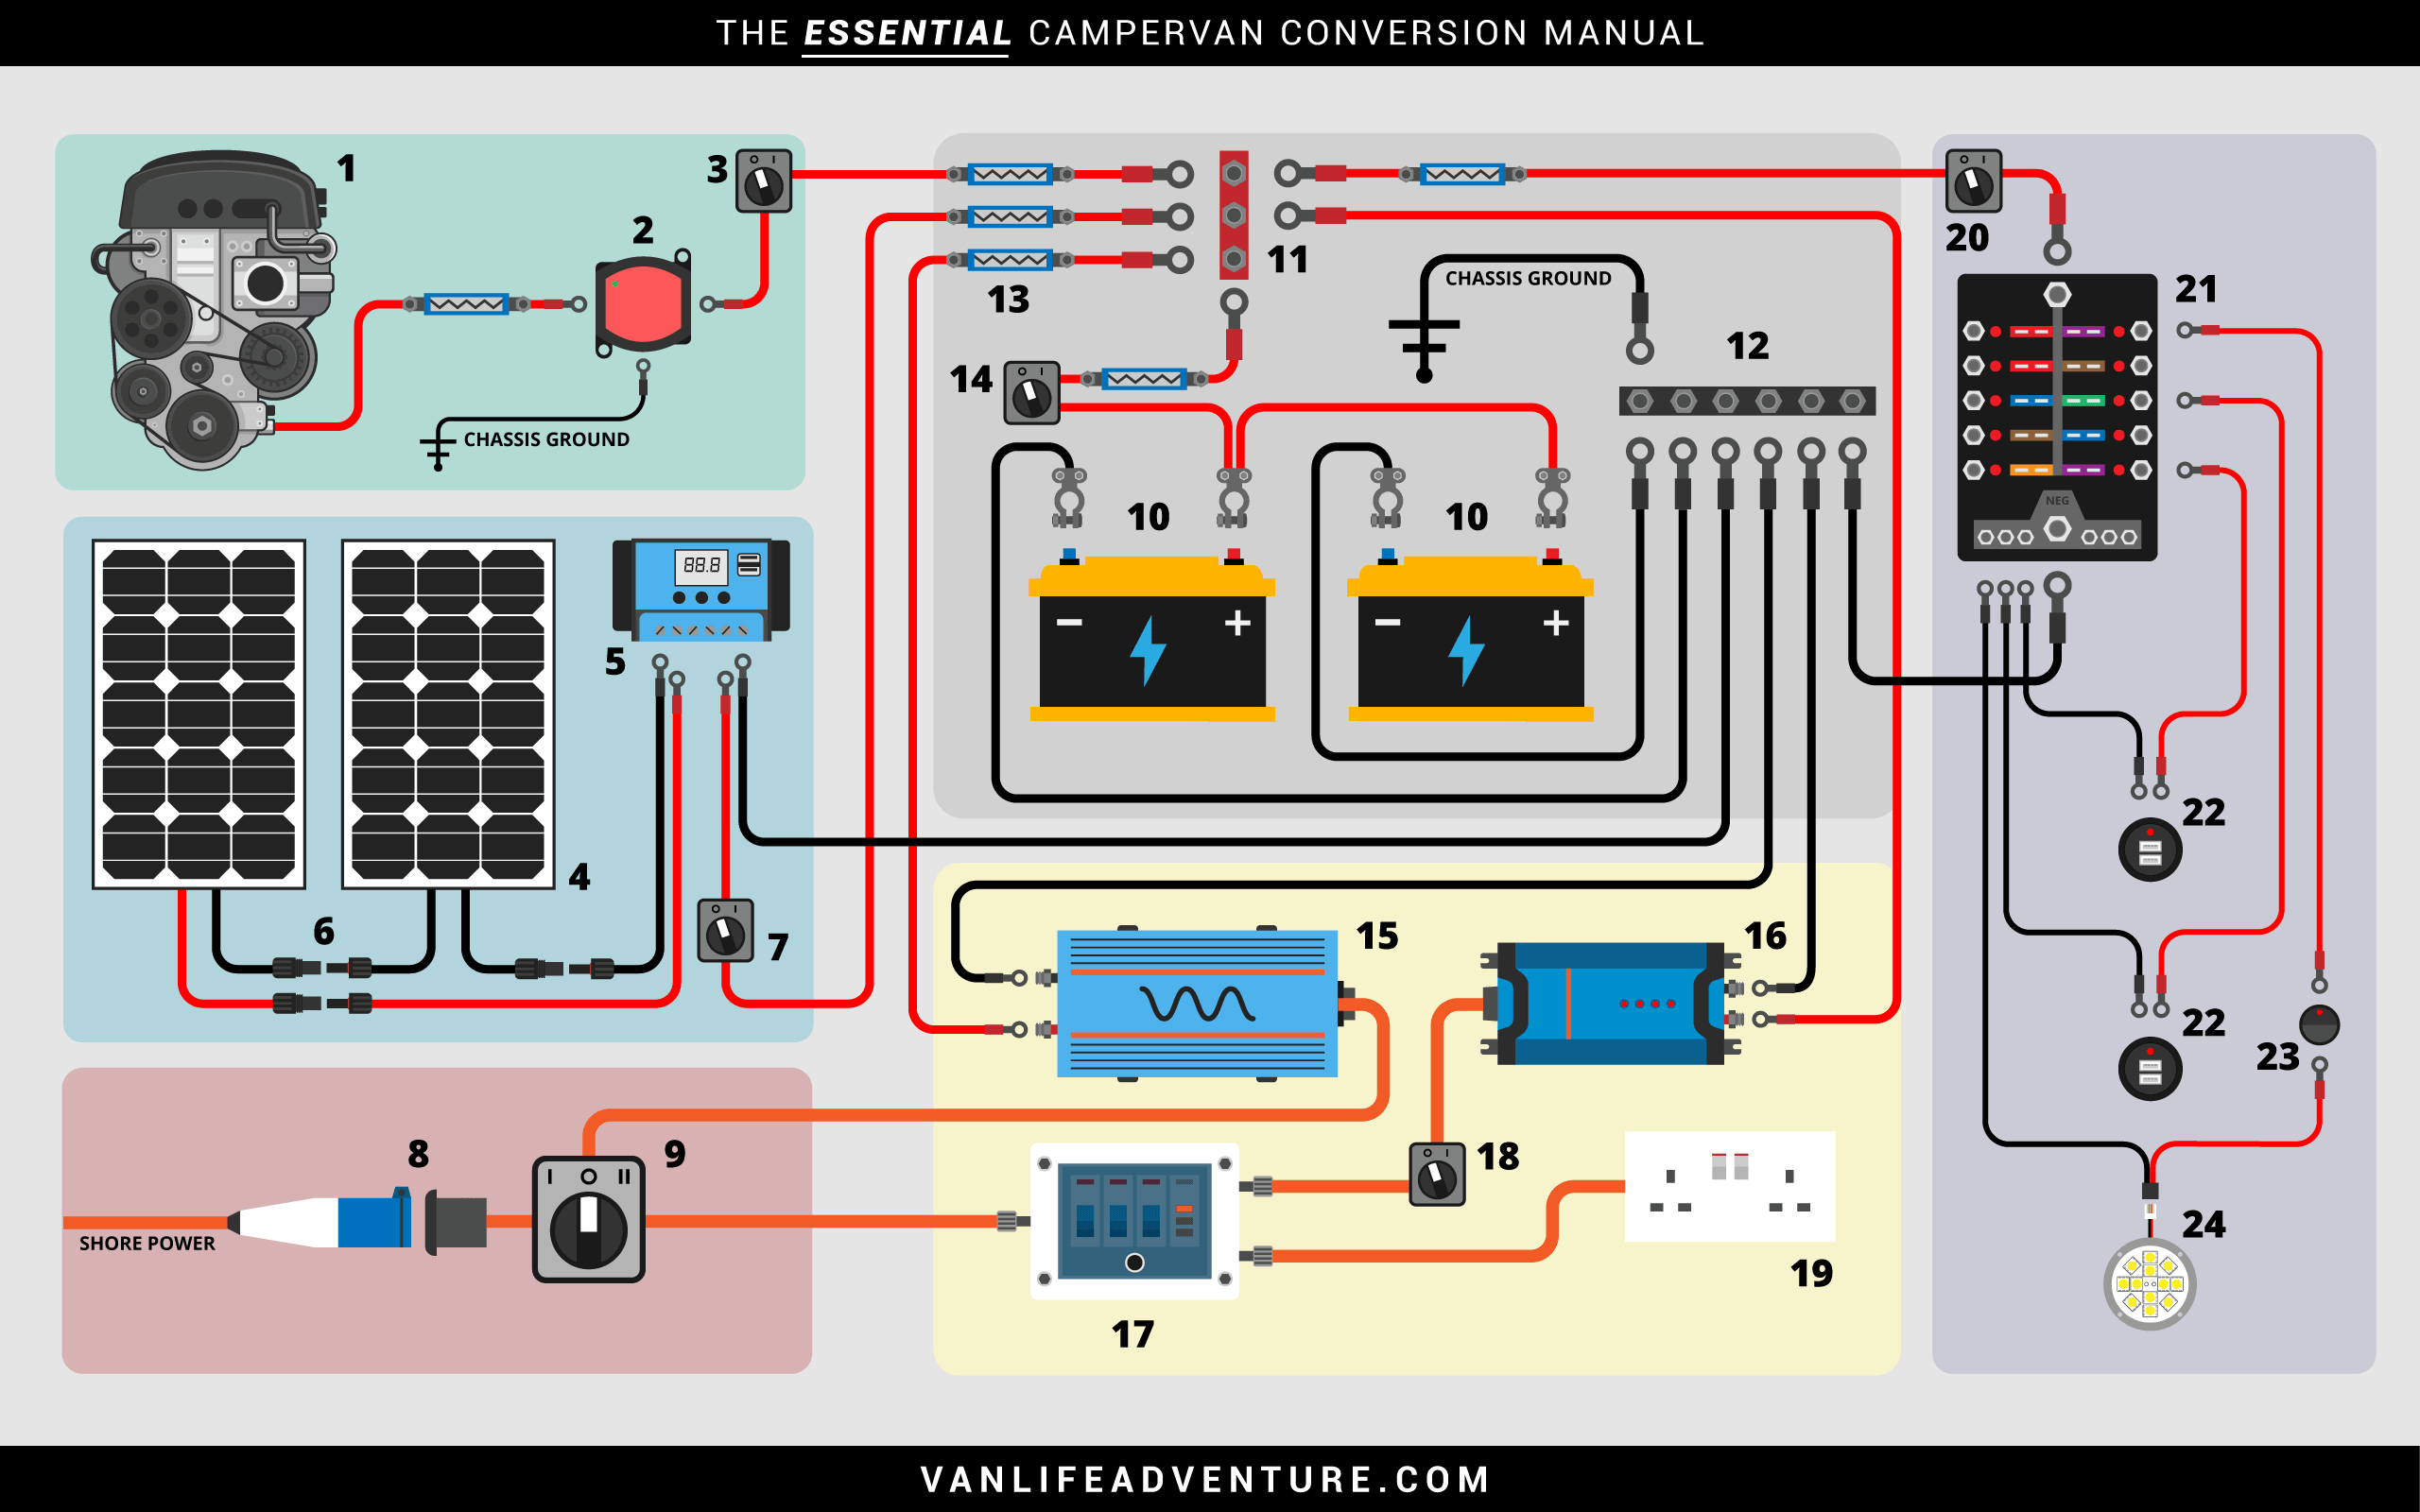 Campervan Electrical System: An Illustrated Guide | VanLife Adventure